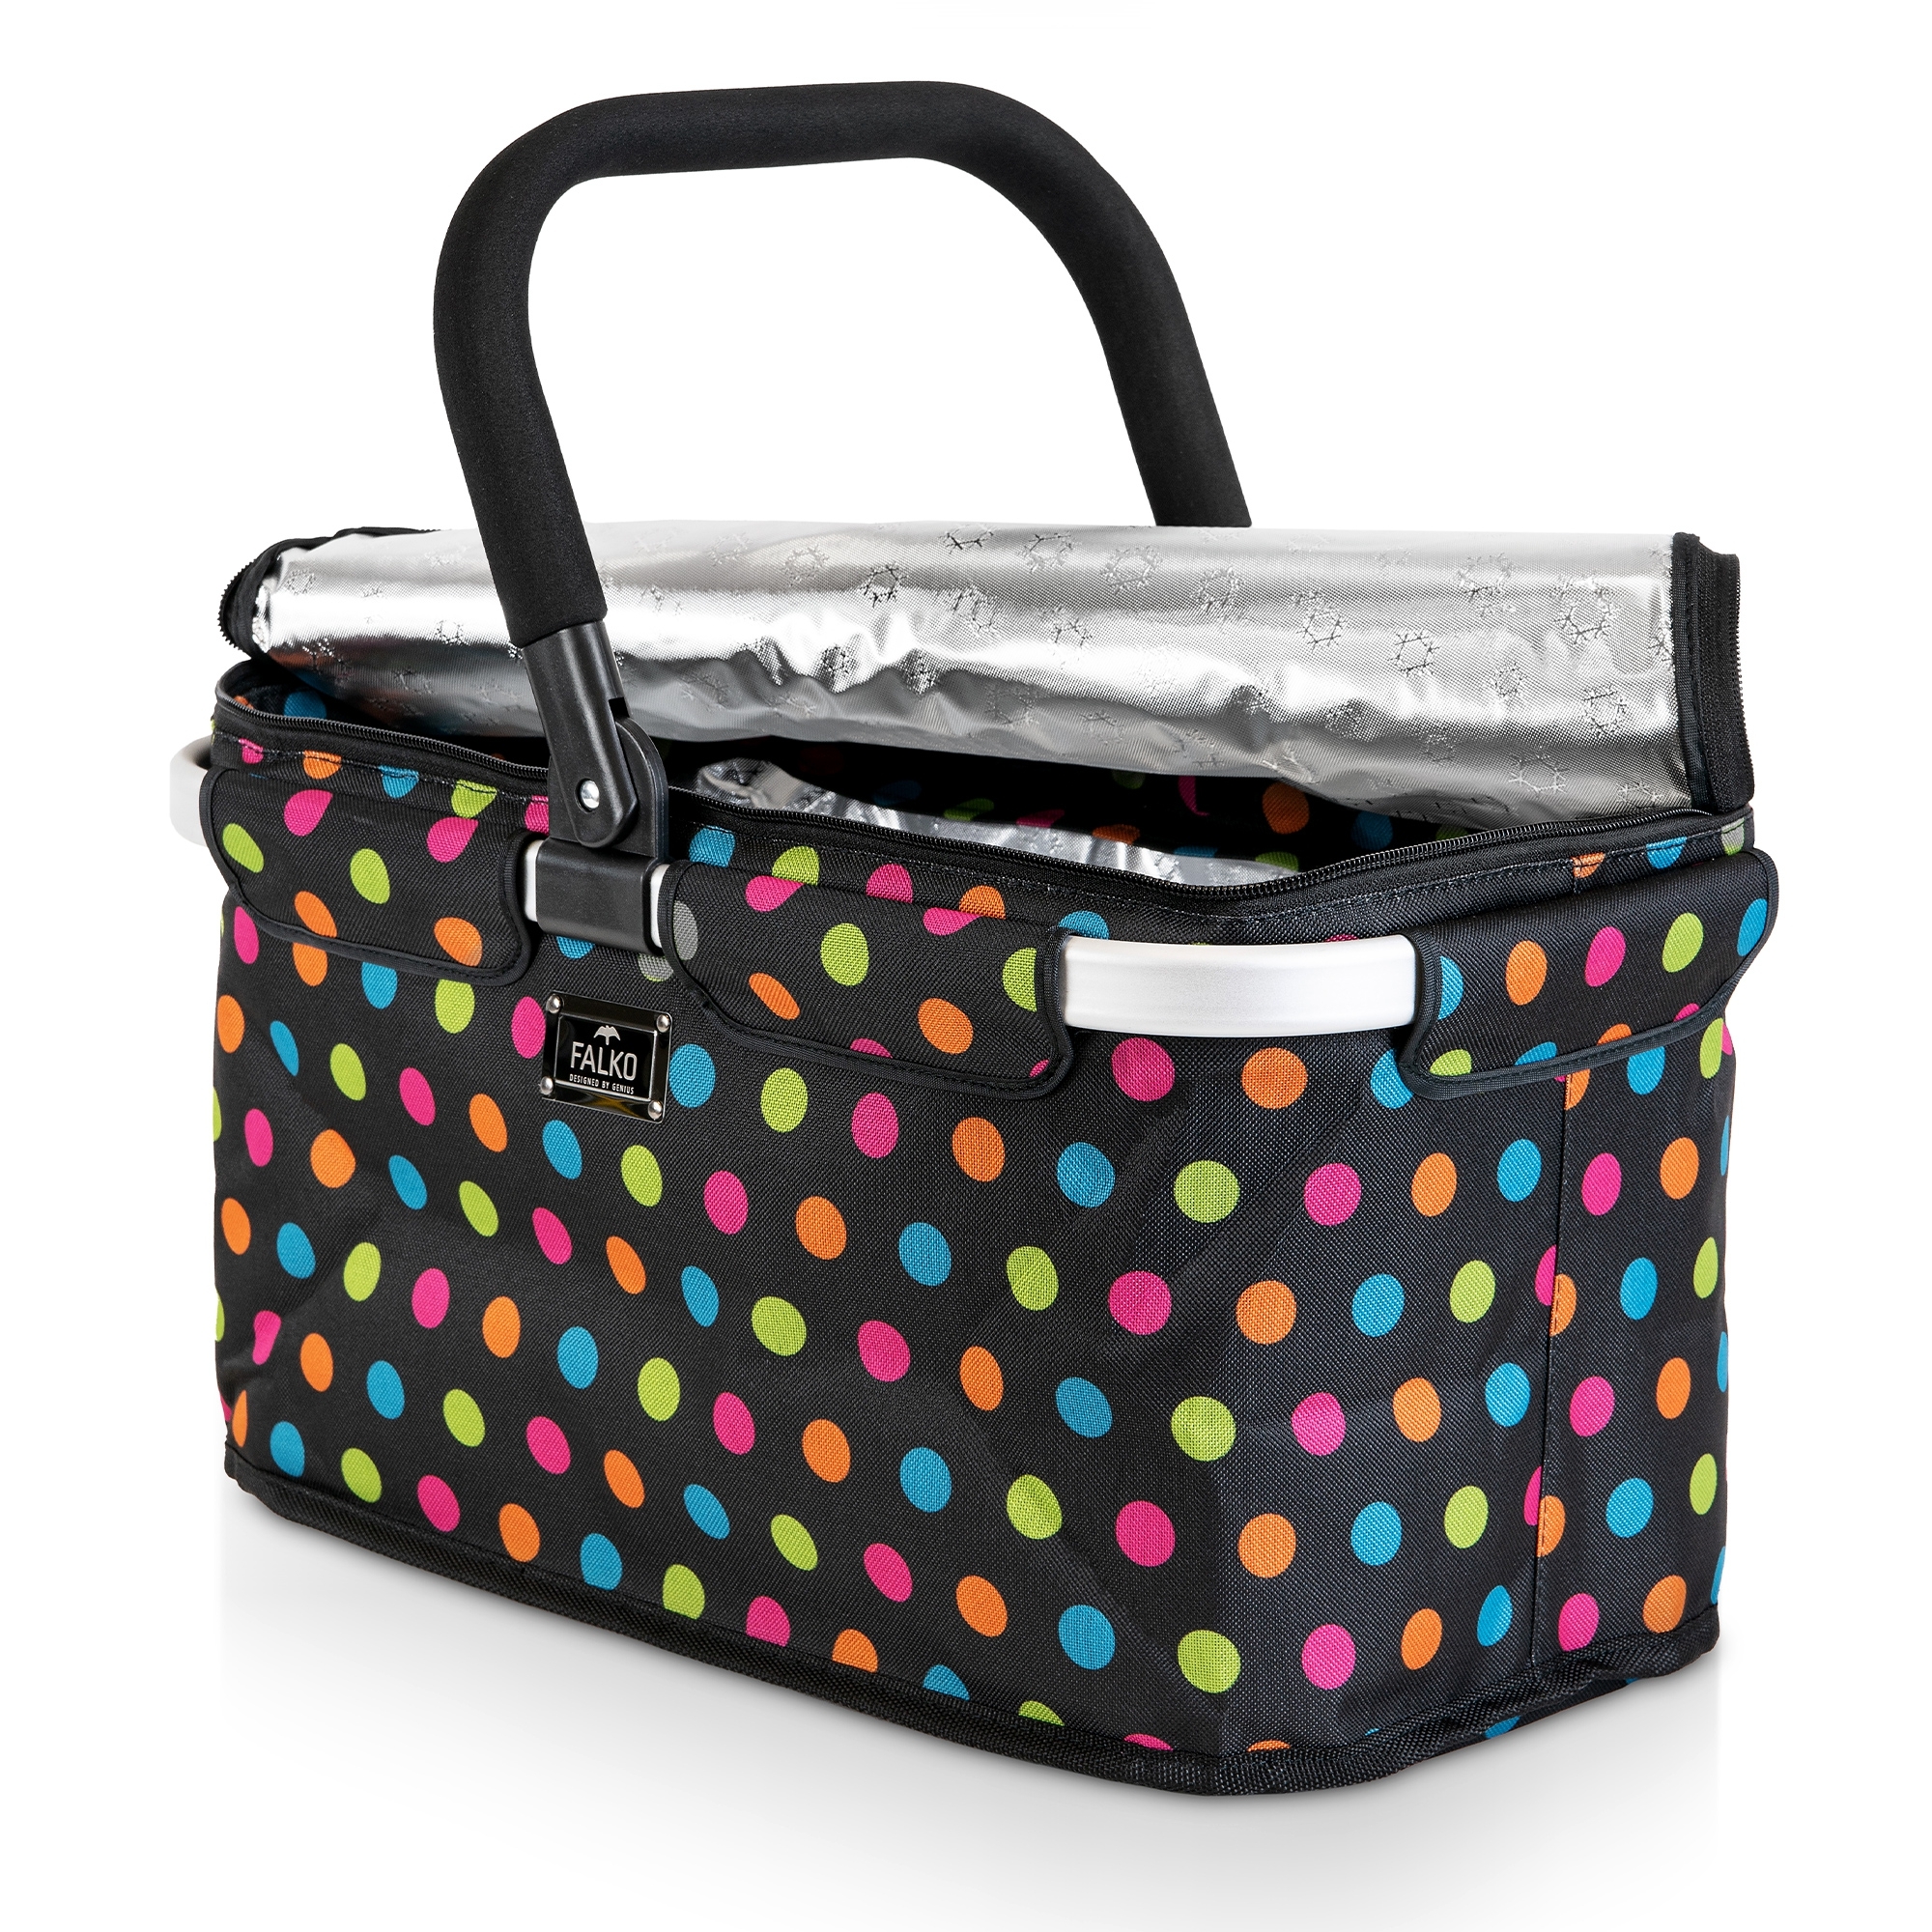 Genius - Falko Thermo Shopping Basket - Black with Dots